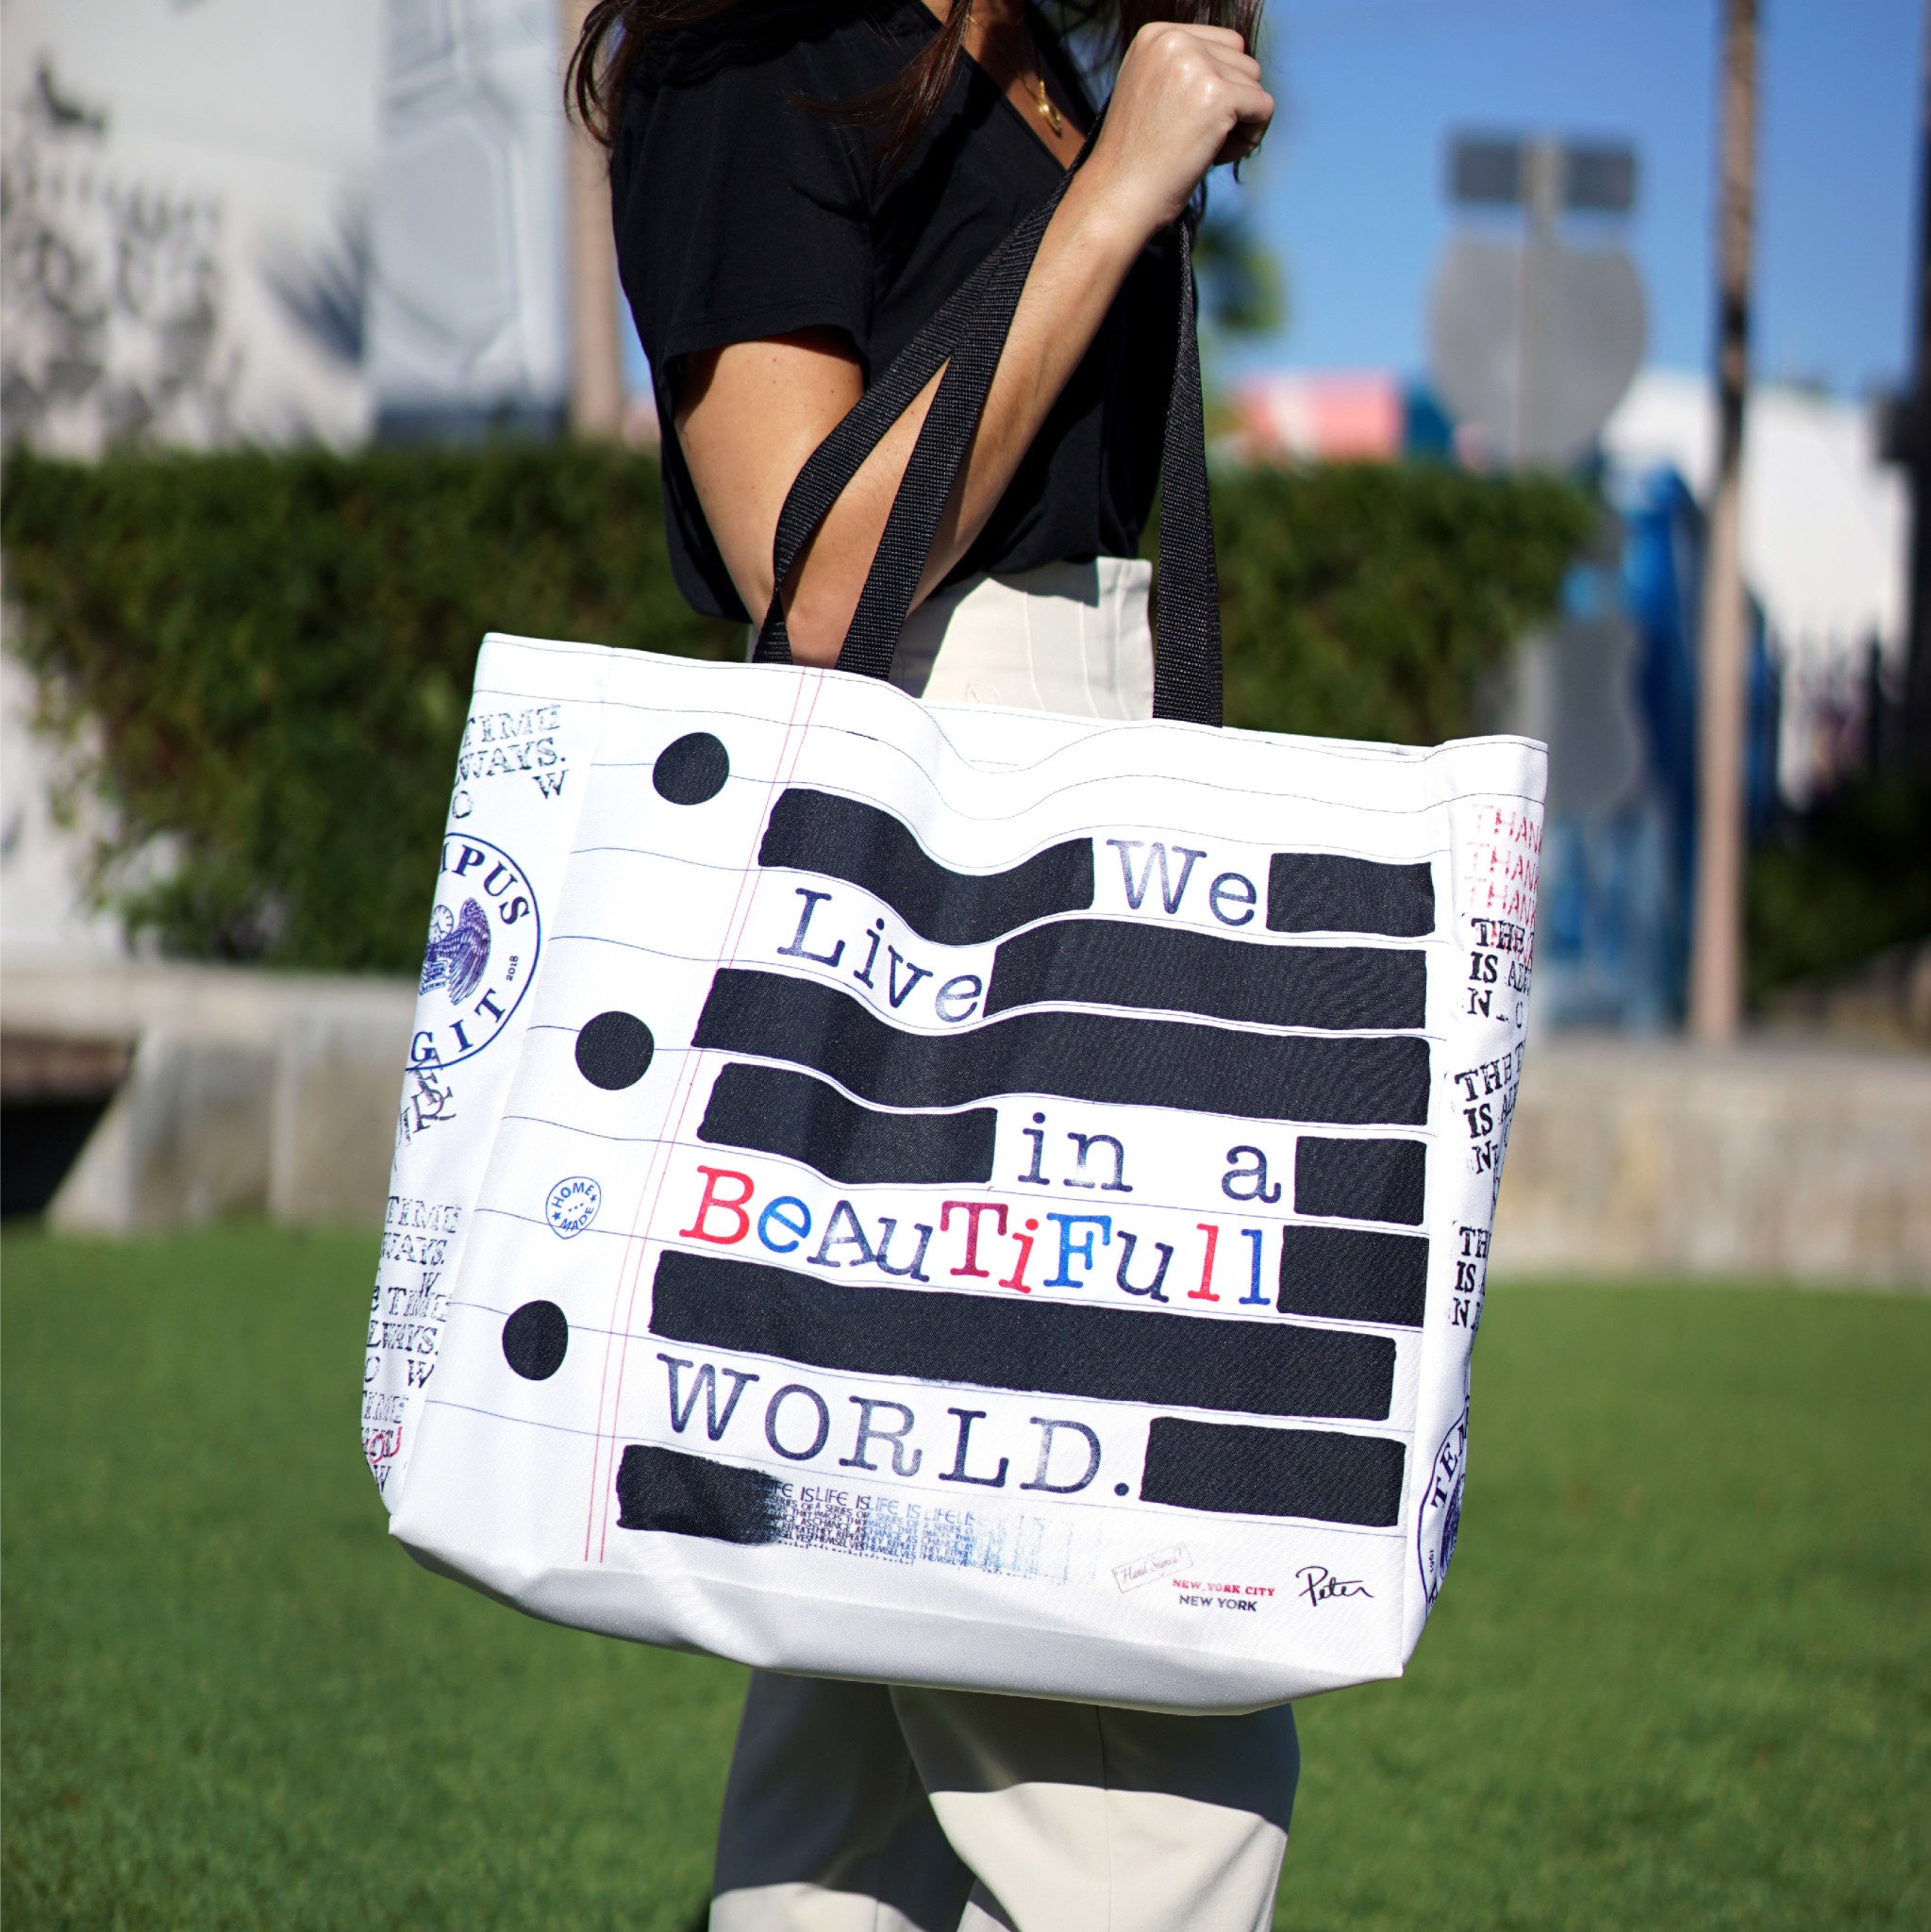 Peter Tunney WE LIVE IN A BEAUTIFUL WORLD Large Tote Bag - Wynwood Walls Shop